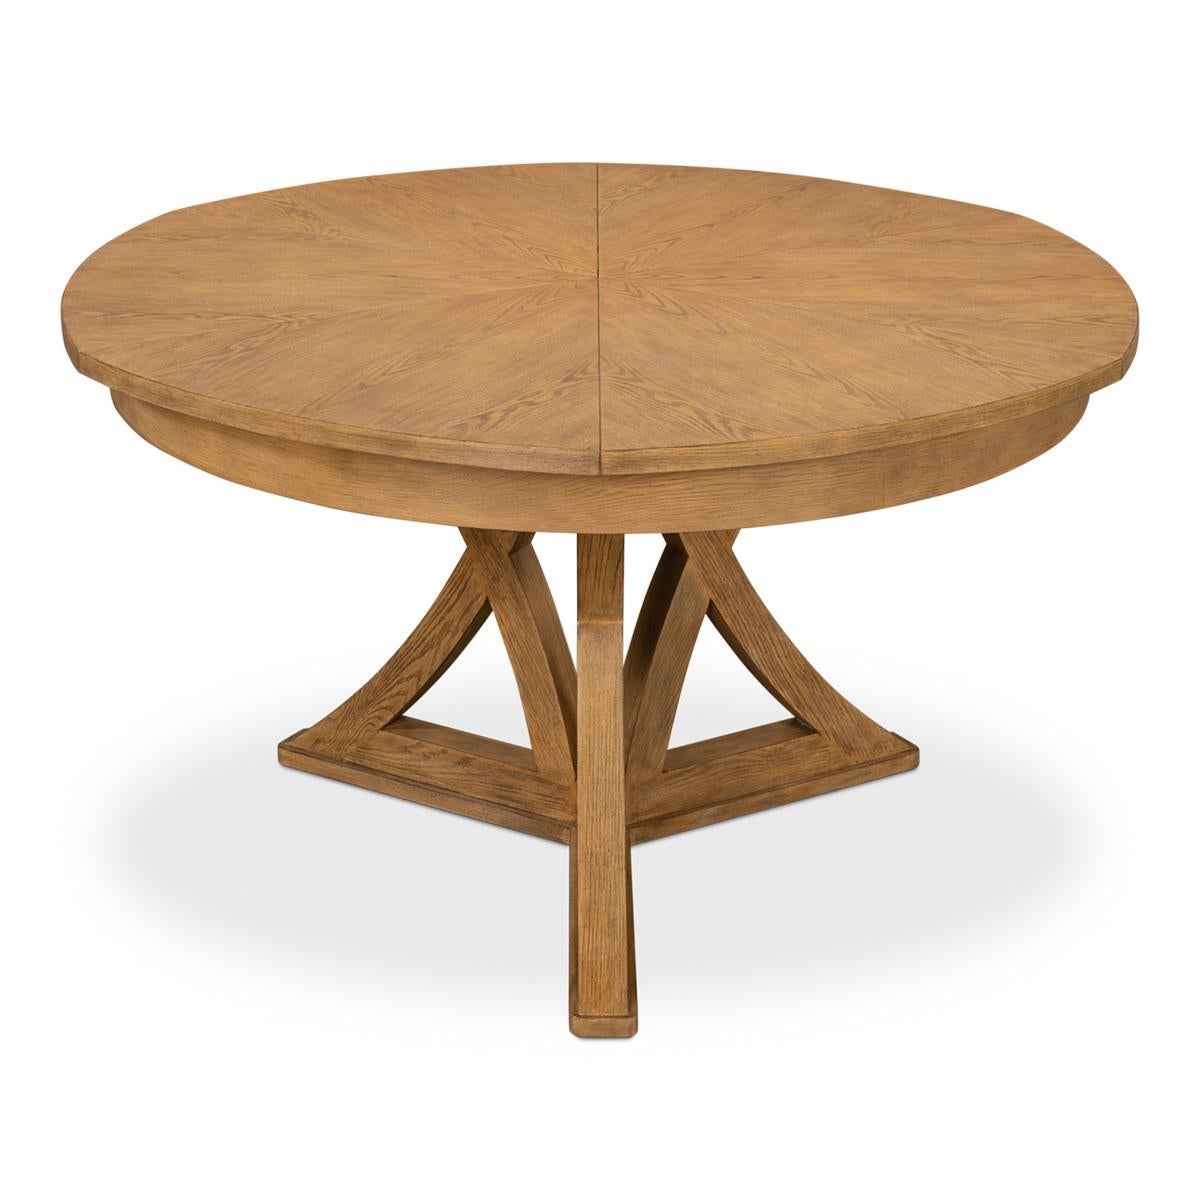 Contemporary Rustic Round Dining Table - Heather Grey For Sale